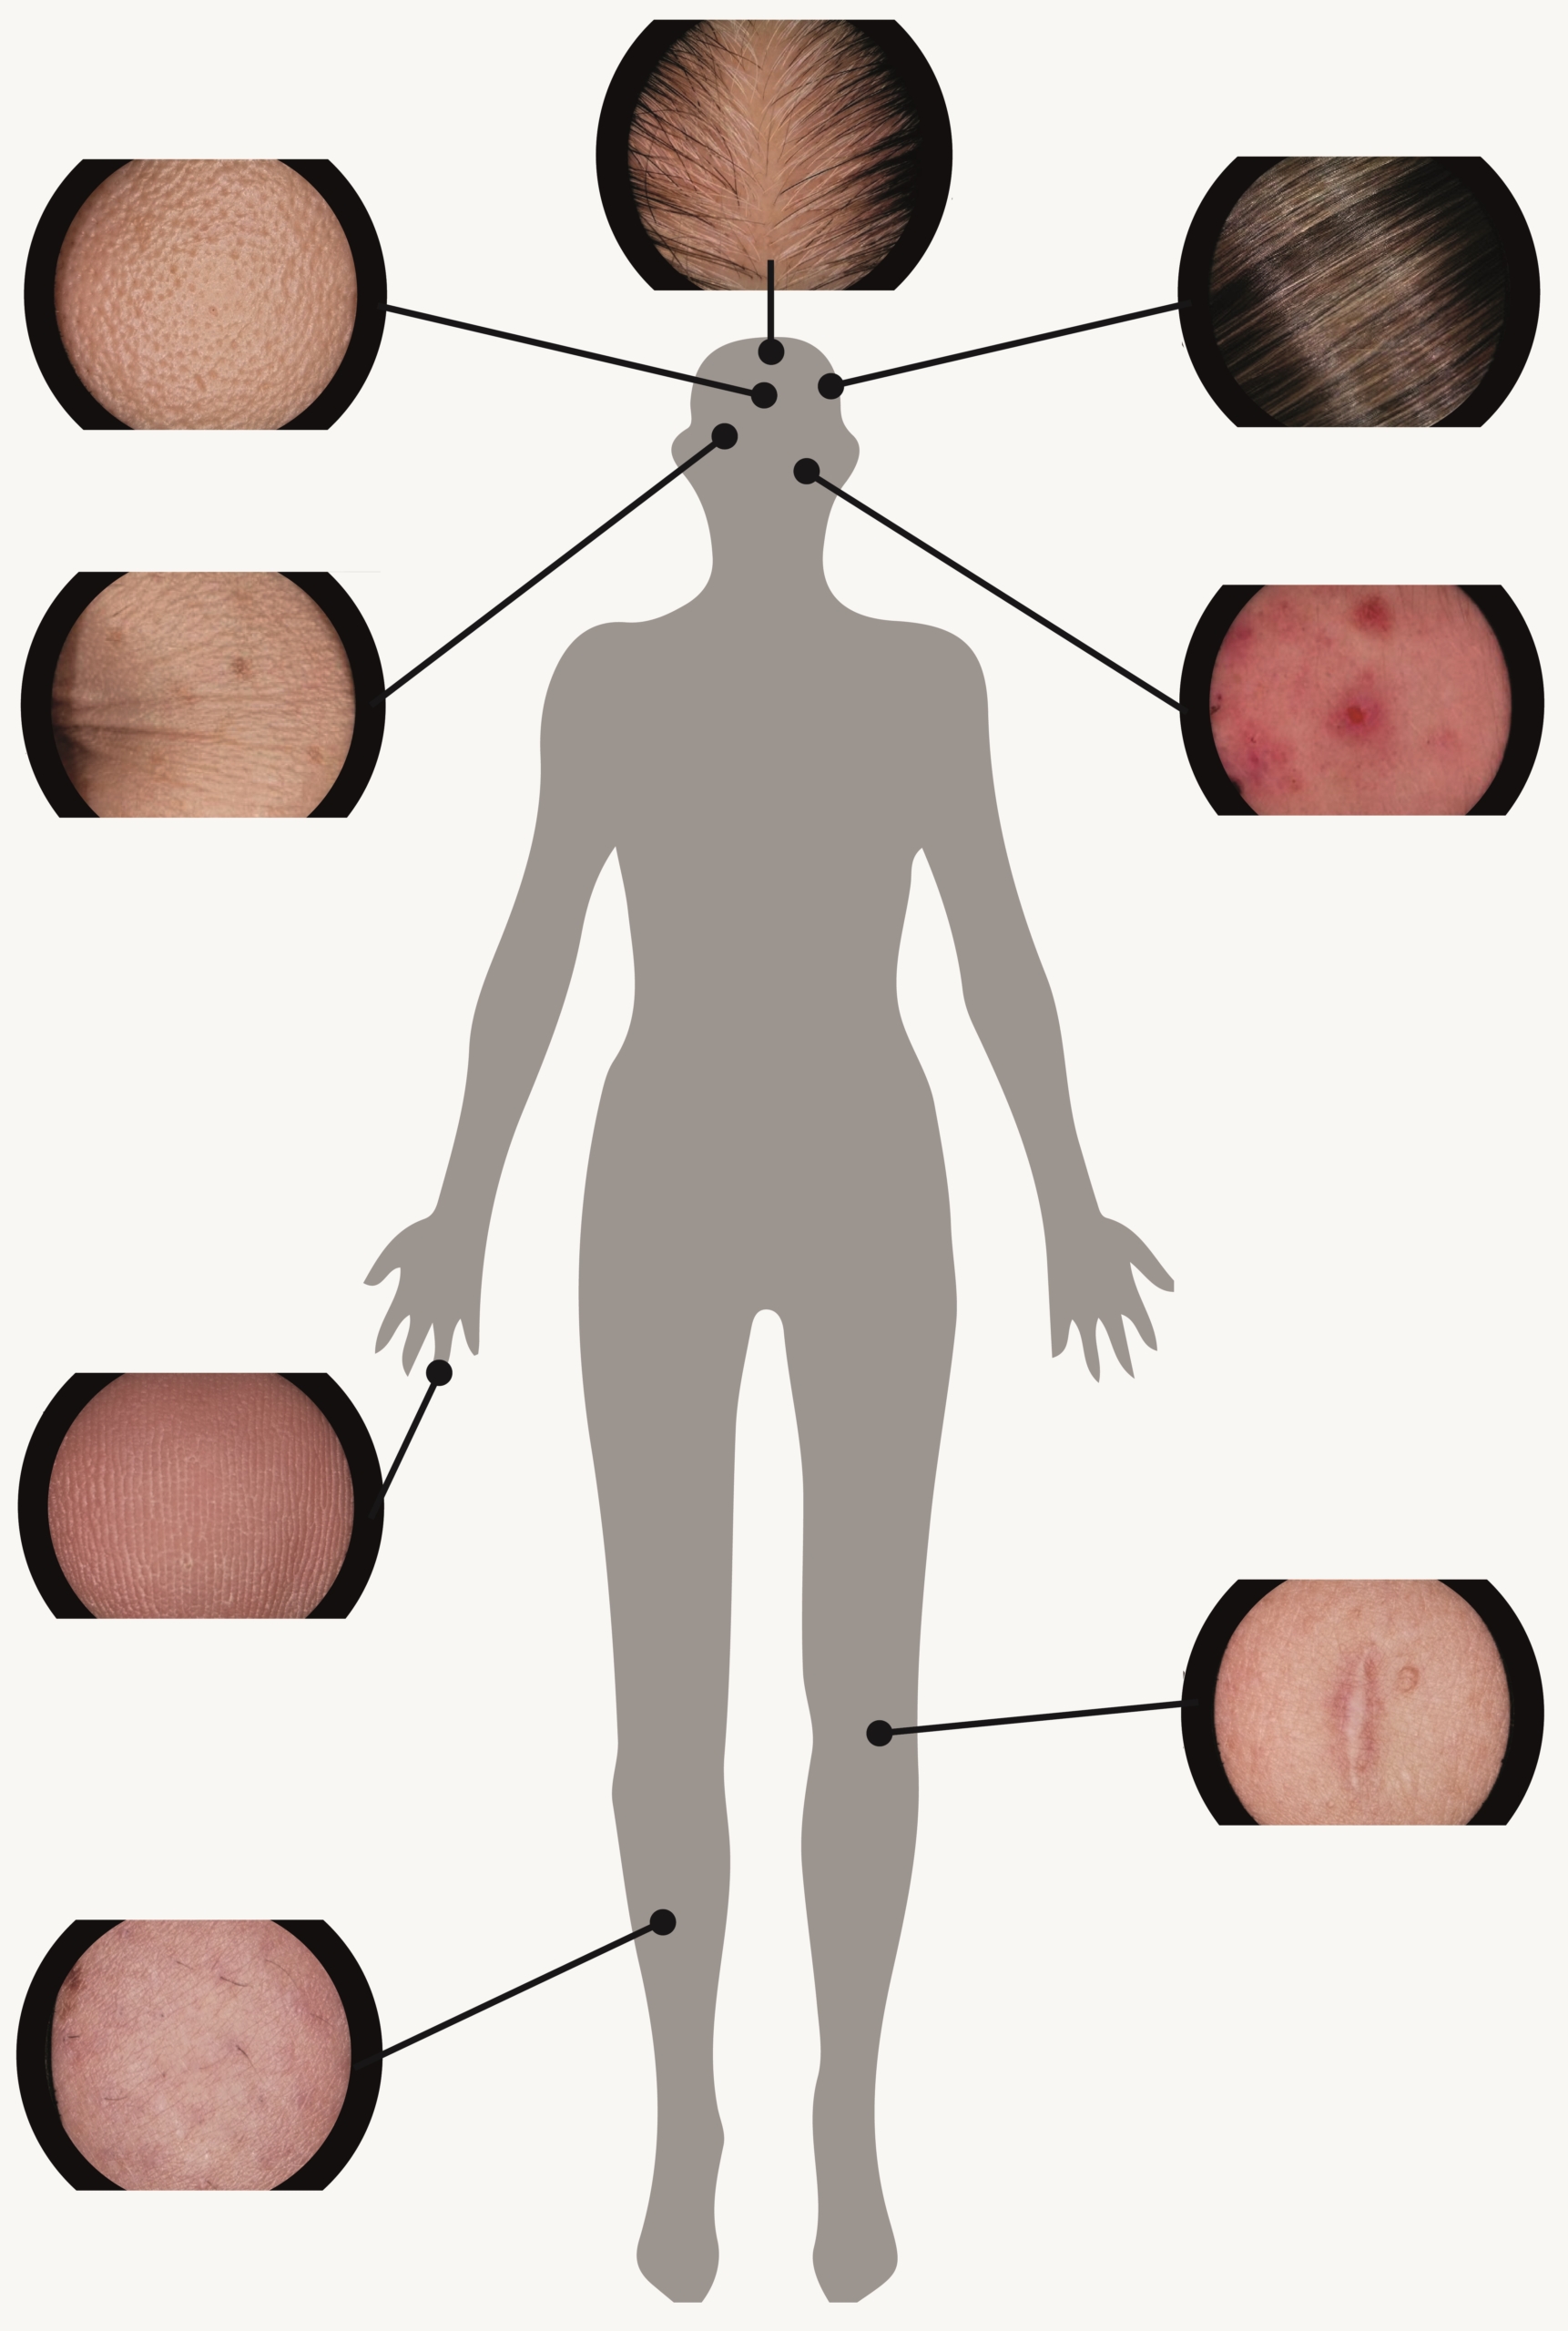 Skincam can image any part of the body.